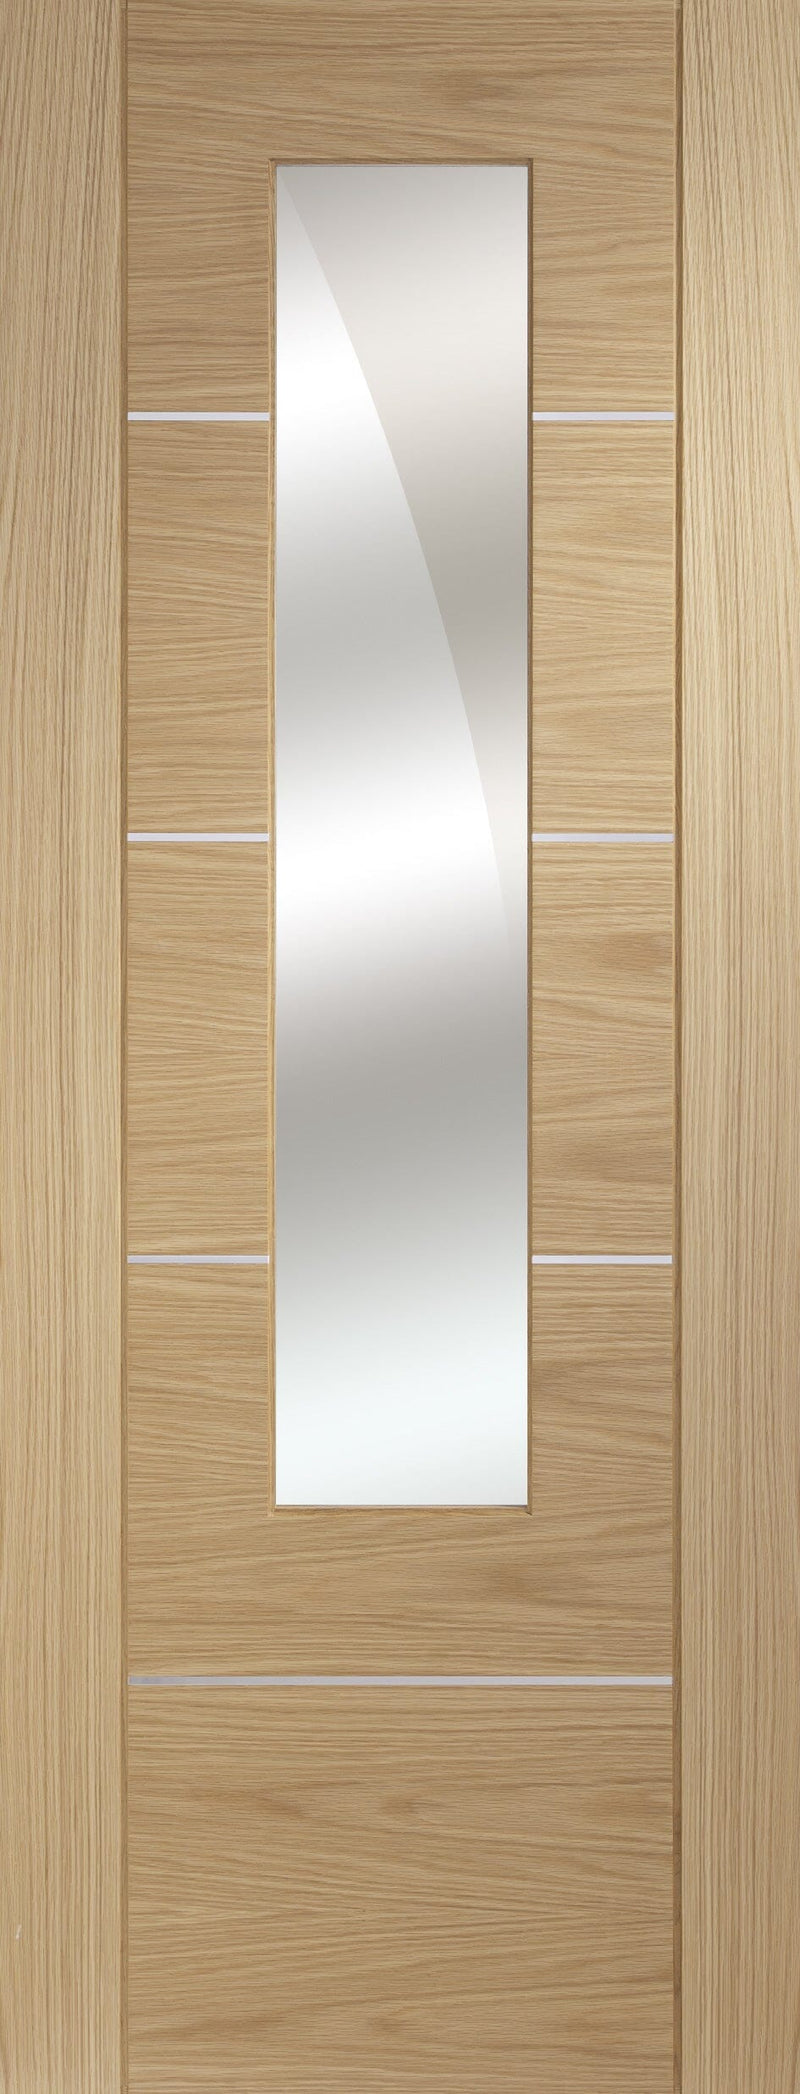 Portici Pre-Finished Oak Door with Mirror Panel